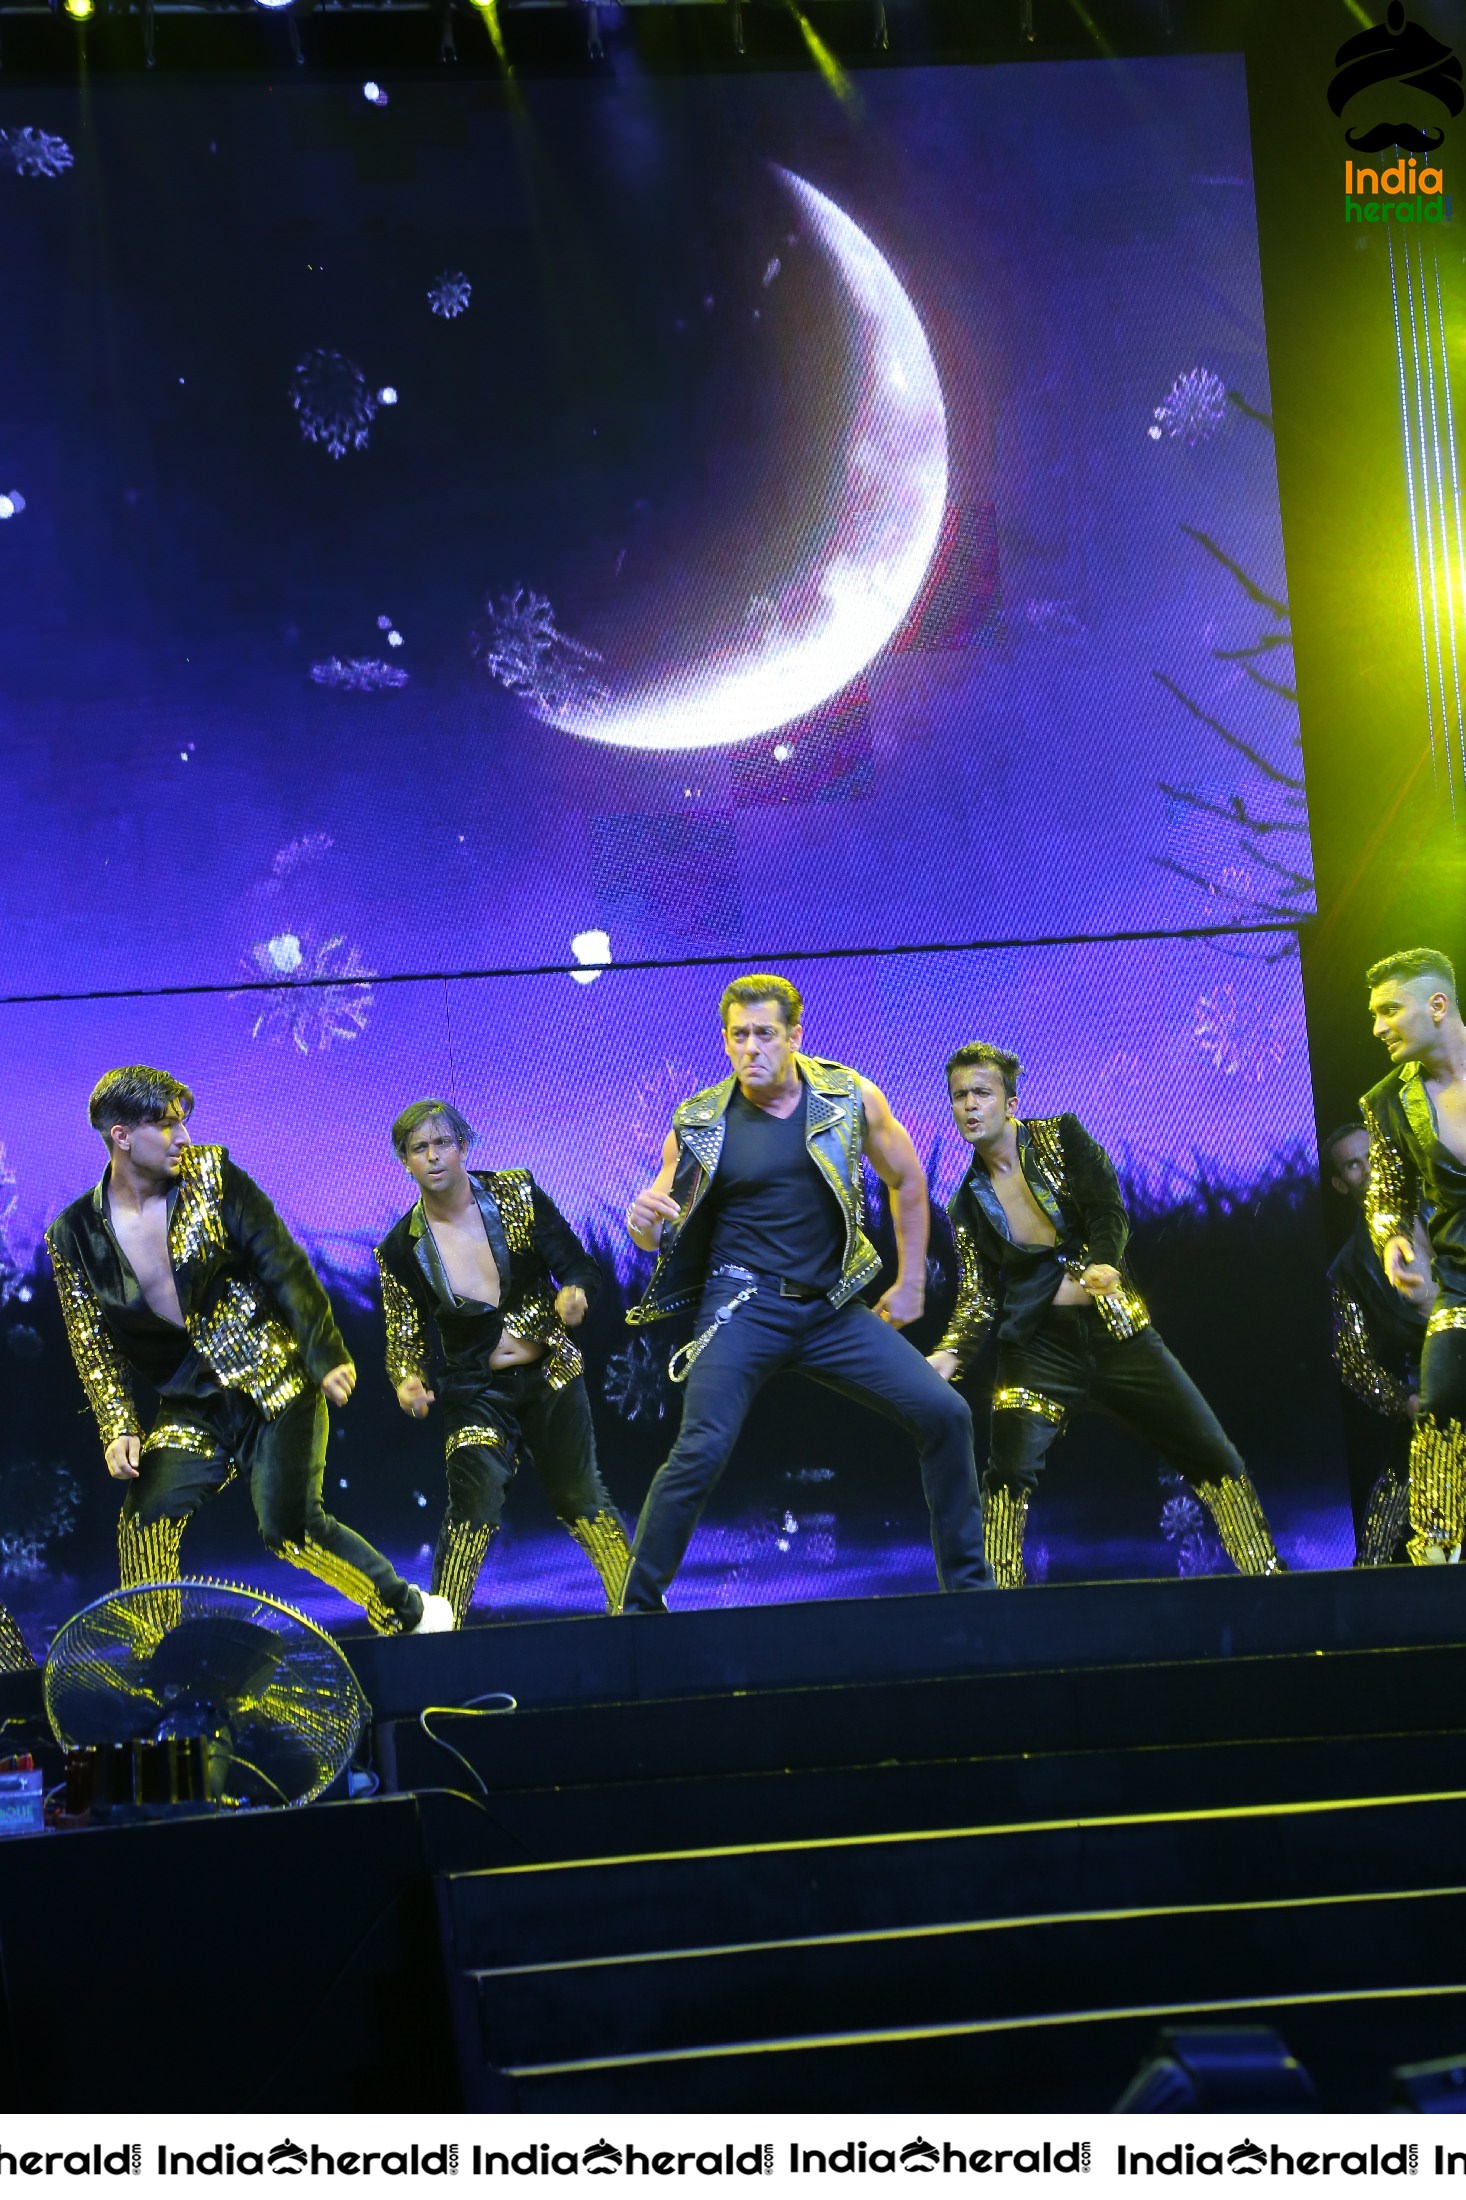 Power Packed performance by Salman Khan at Dabangg Tour in Hyderabad Set 2